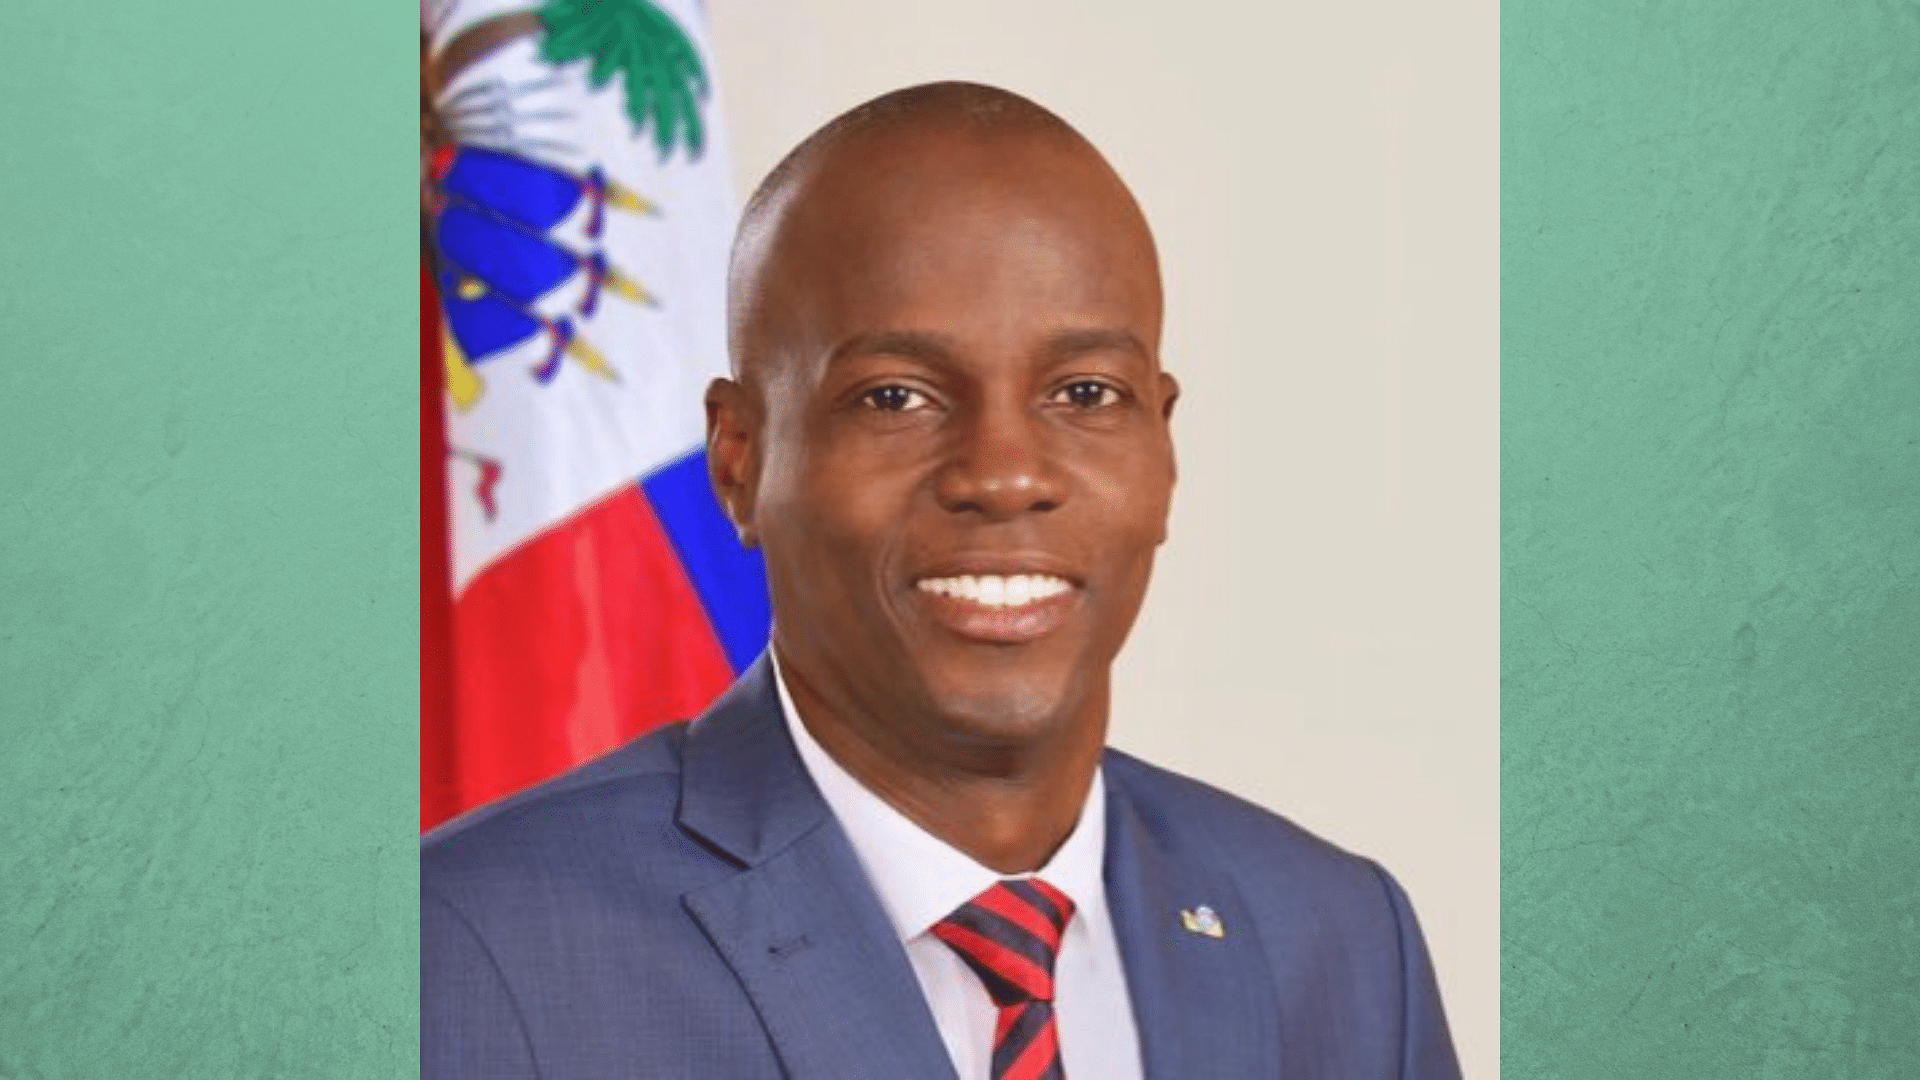 <div class="paragraphs"><p>As per a statement from the interim prime minister’s office, a gang of armed men assassinated Haiti's president Jovenel Moïs at his personal residence in the early hours of Wednesday, 7 July.</p></div>